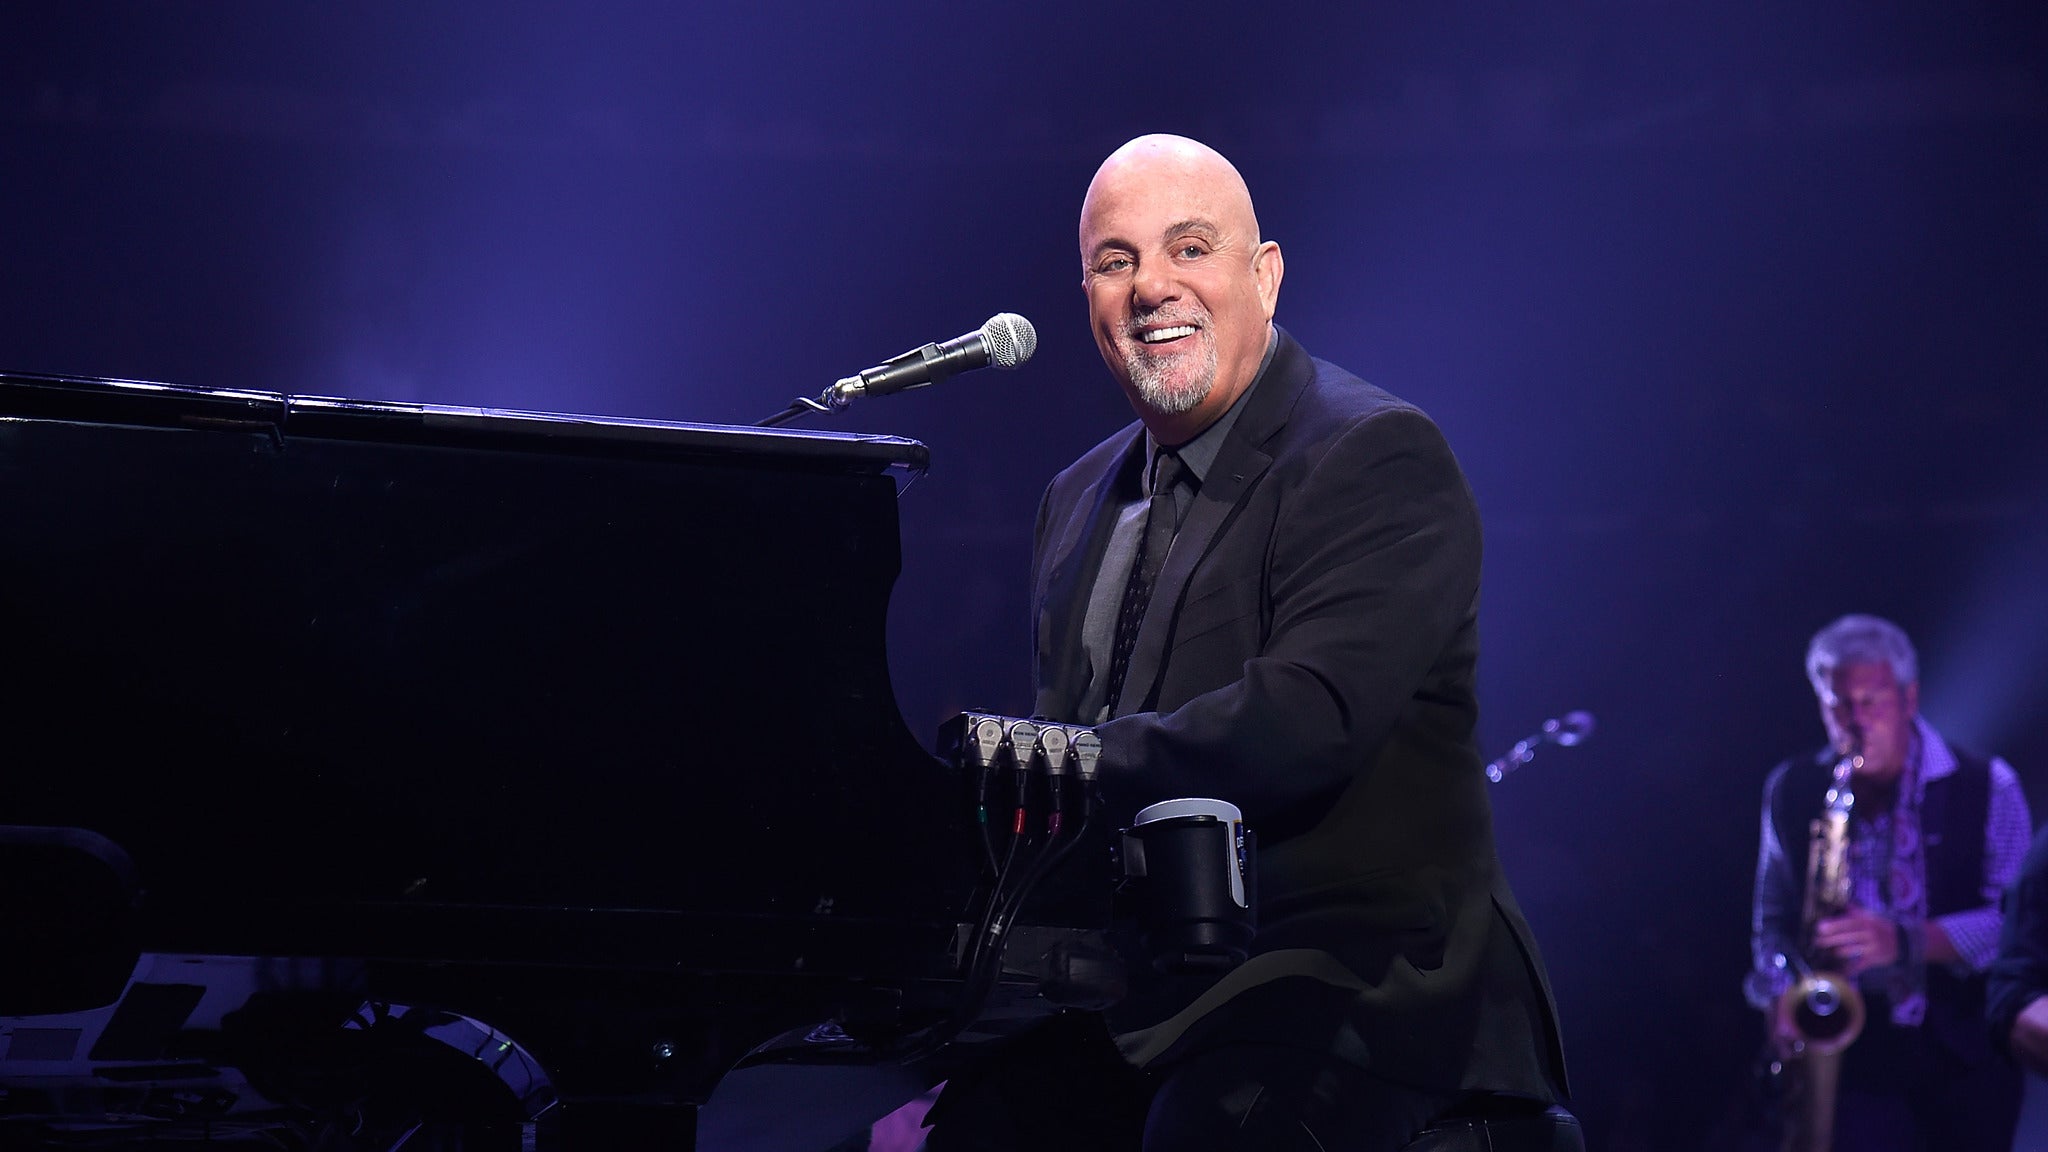 Billy Joel in Orchard Park promo photo for American Express® Card Member presale offer code